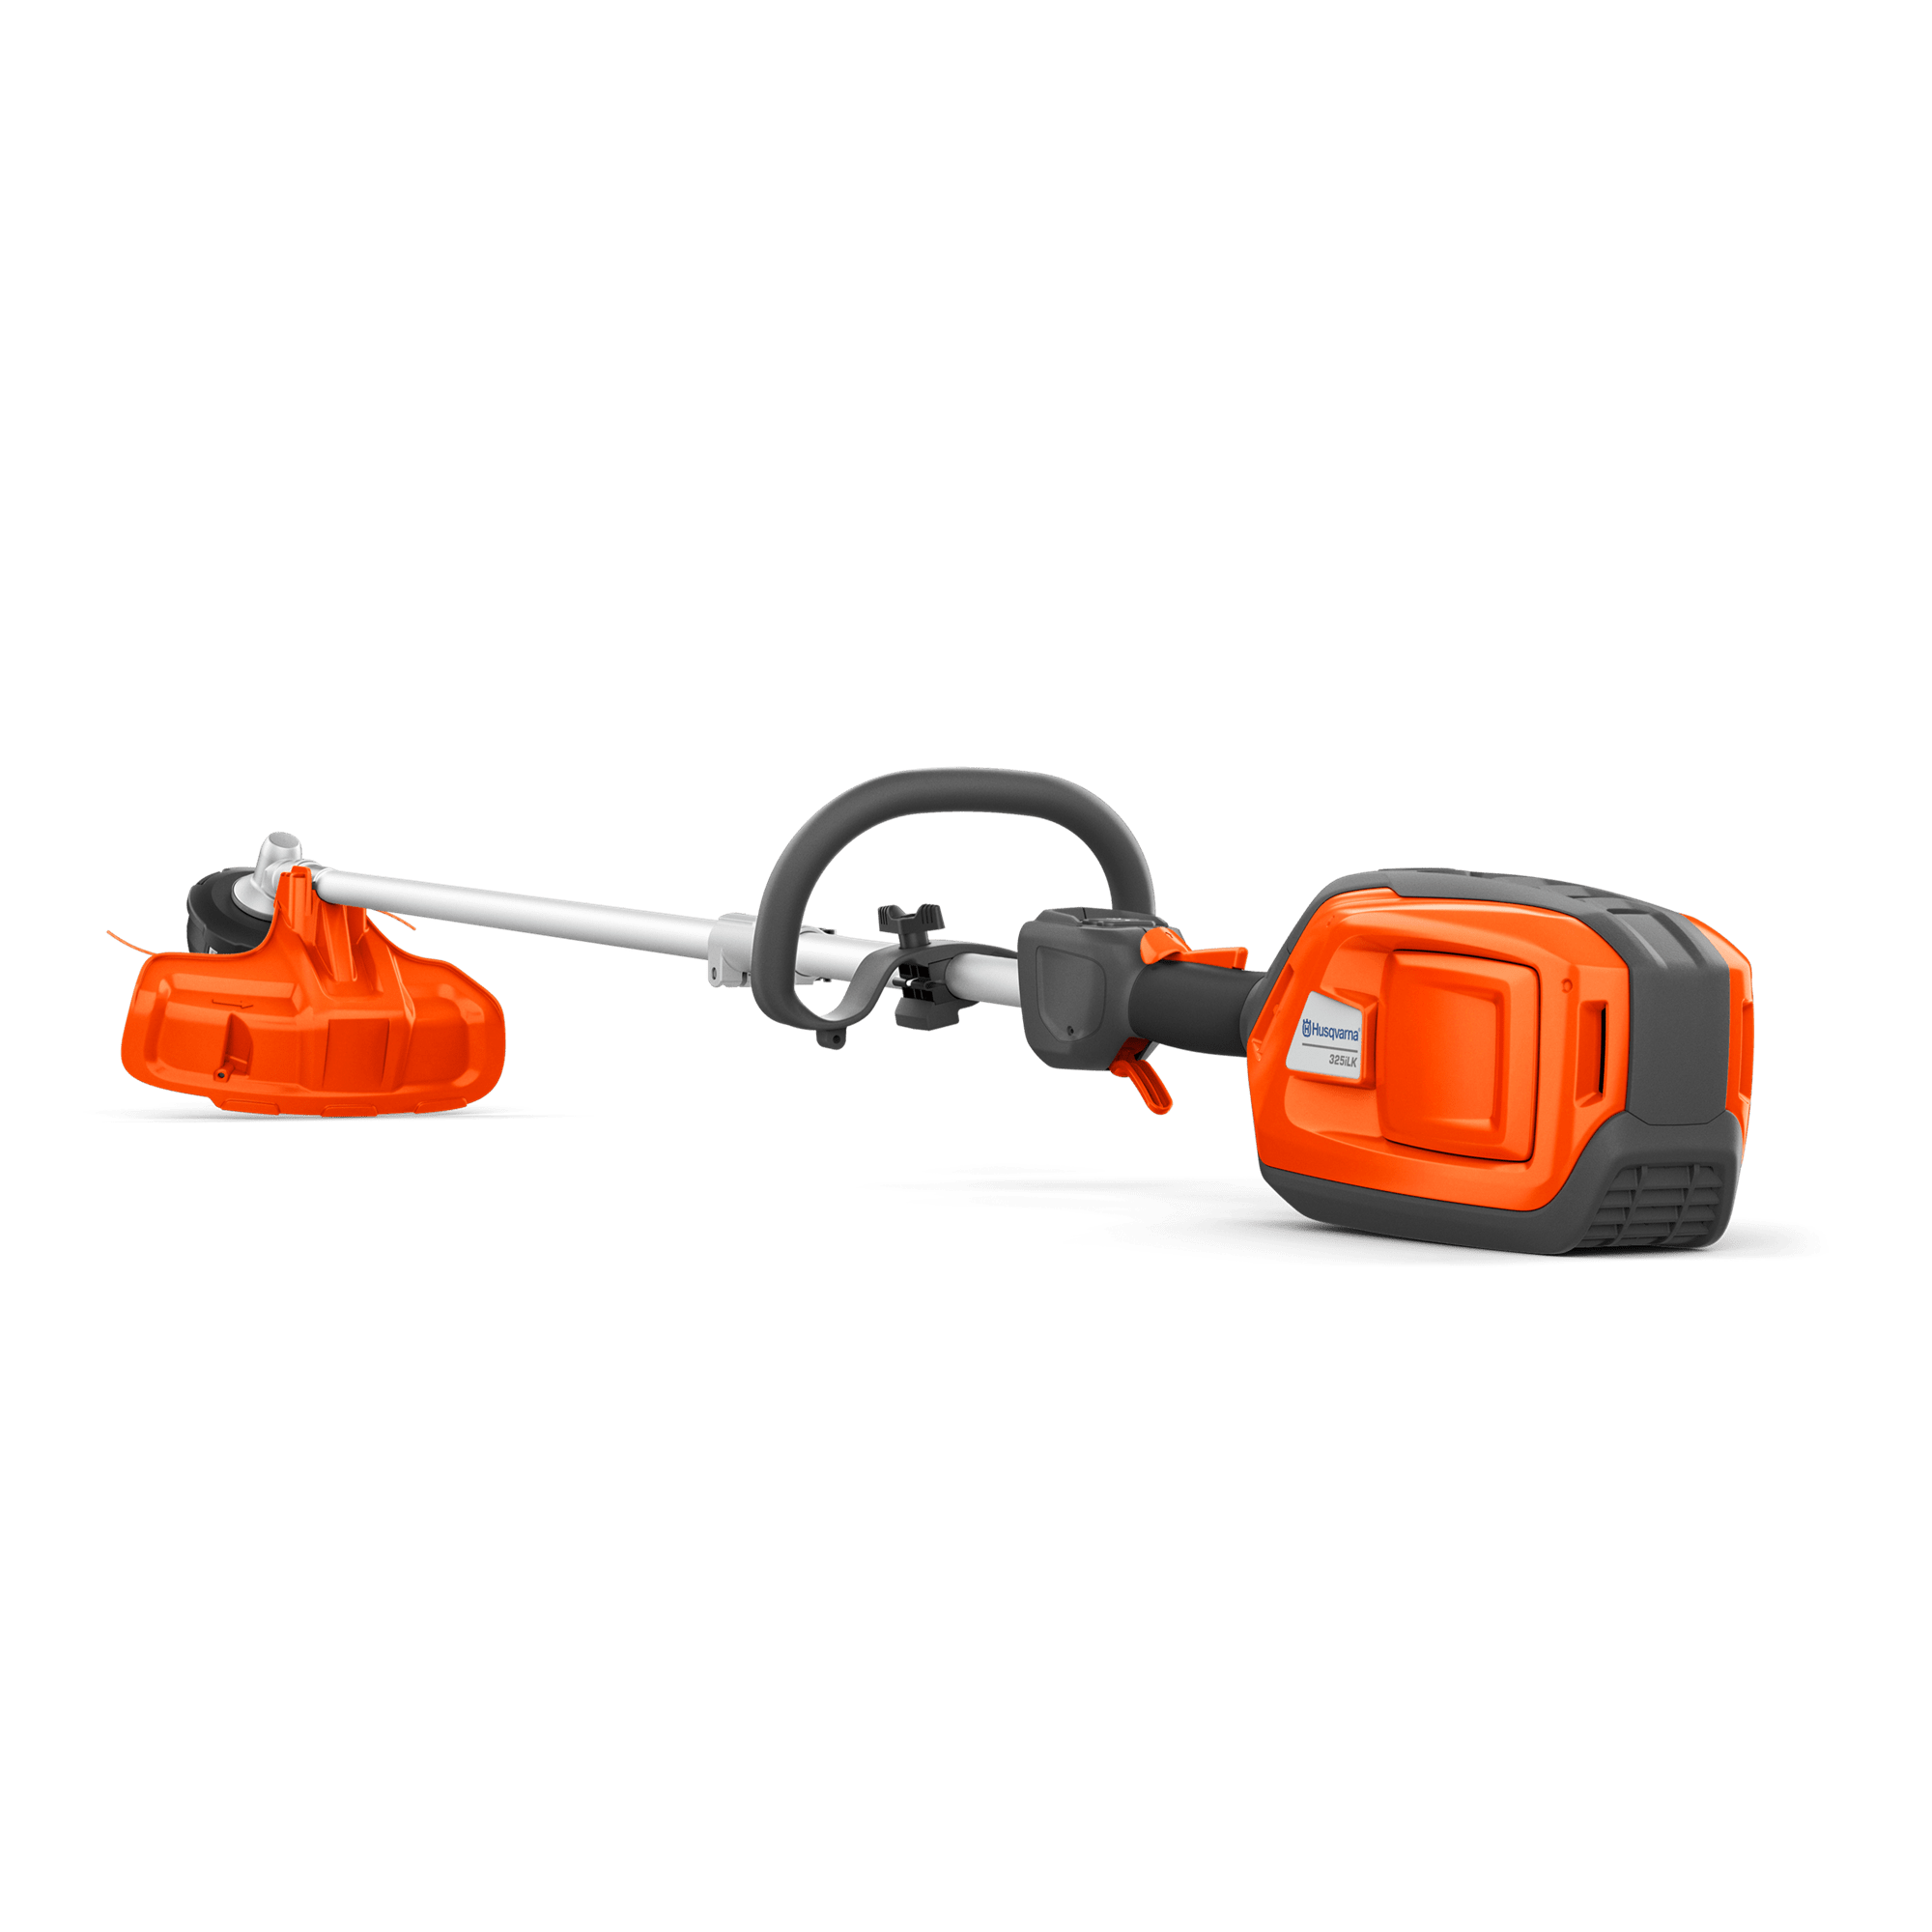 Image for HUSQVARNA 325iLK without trimmer attachment from HusqvarnaB2C